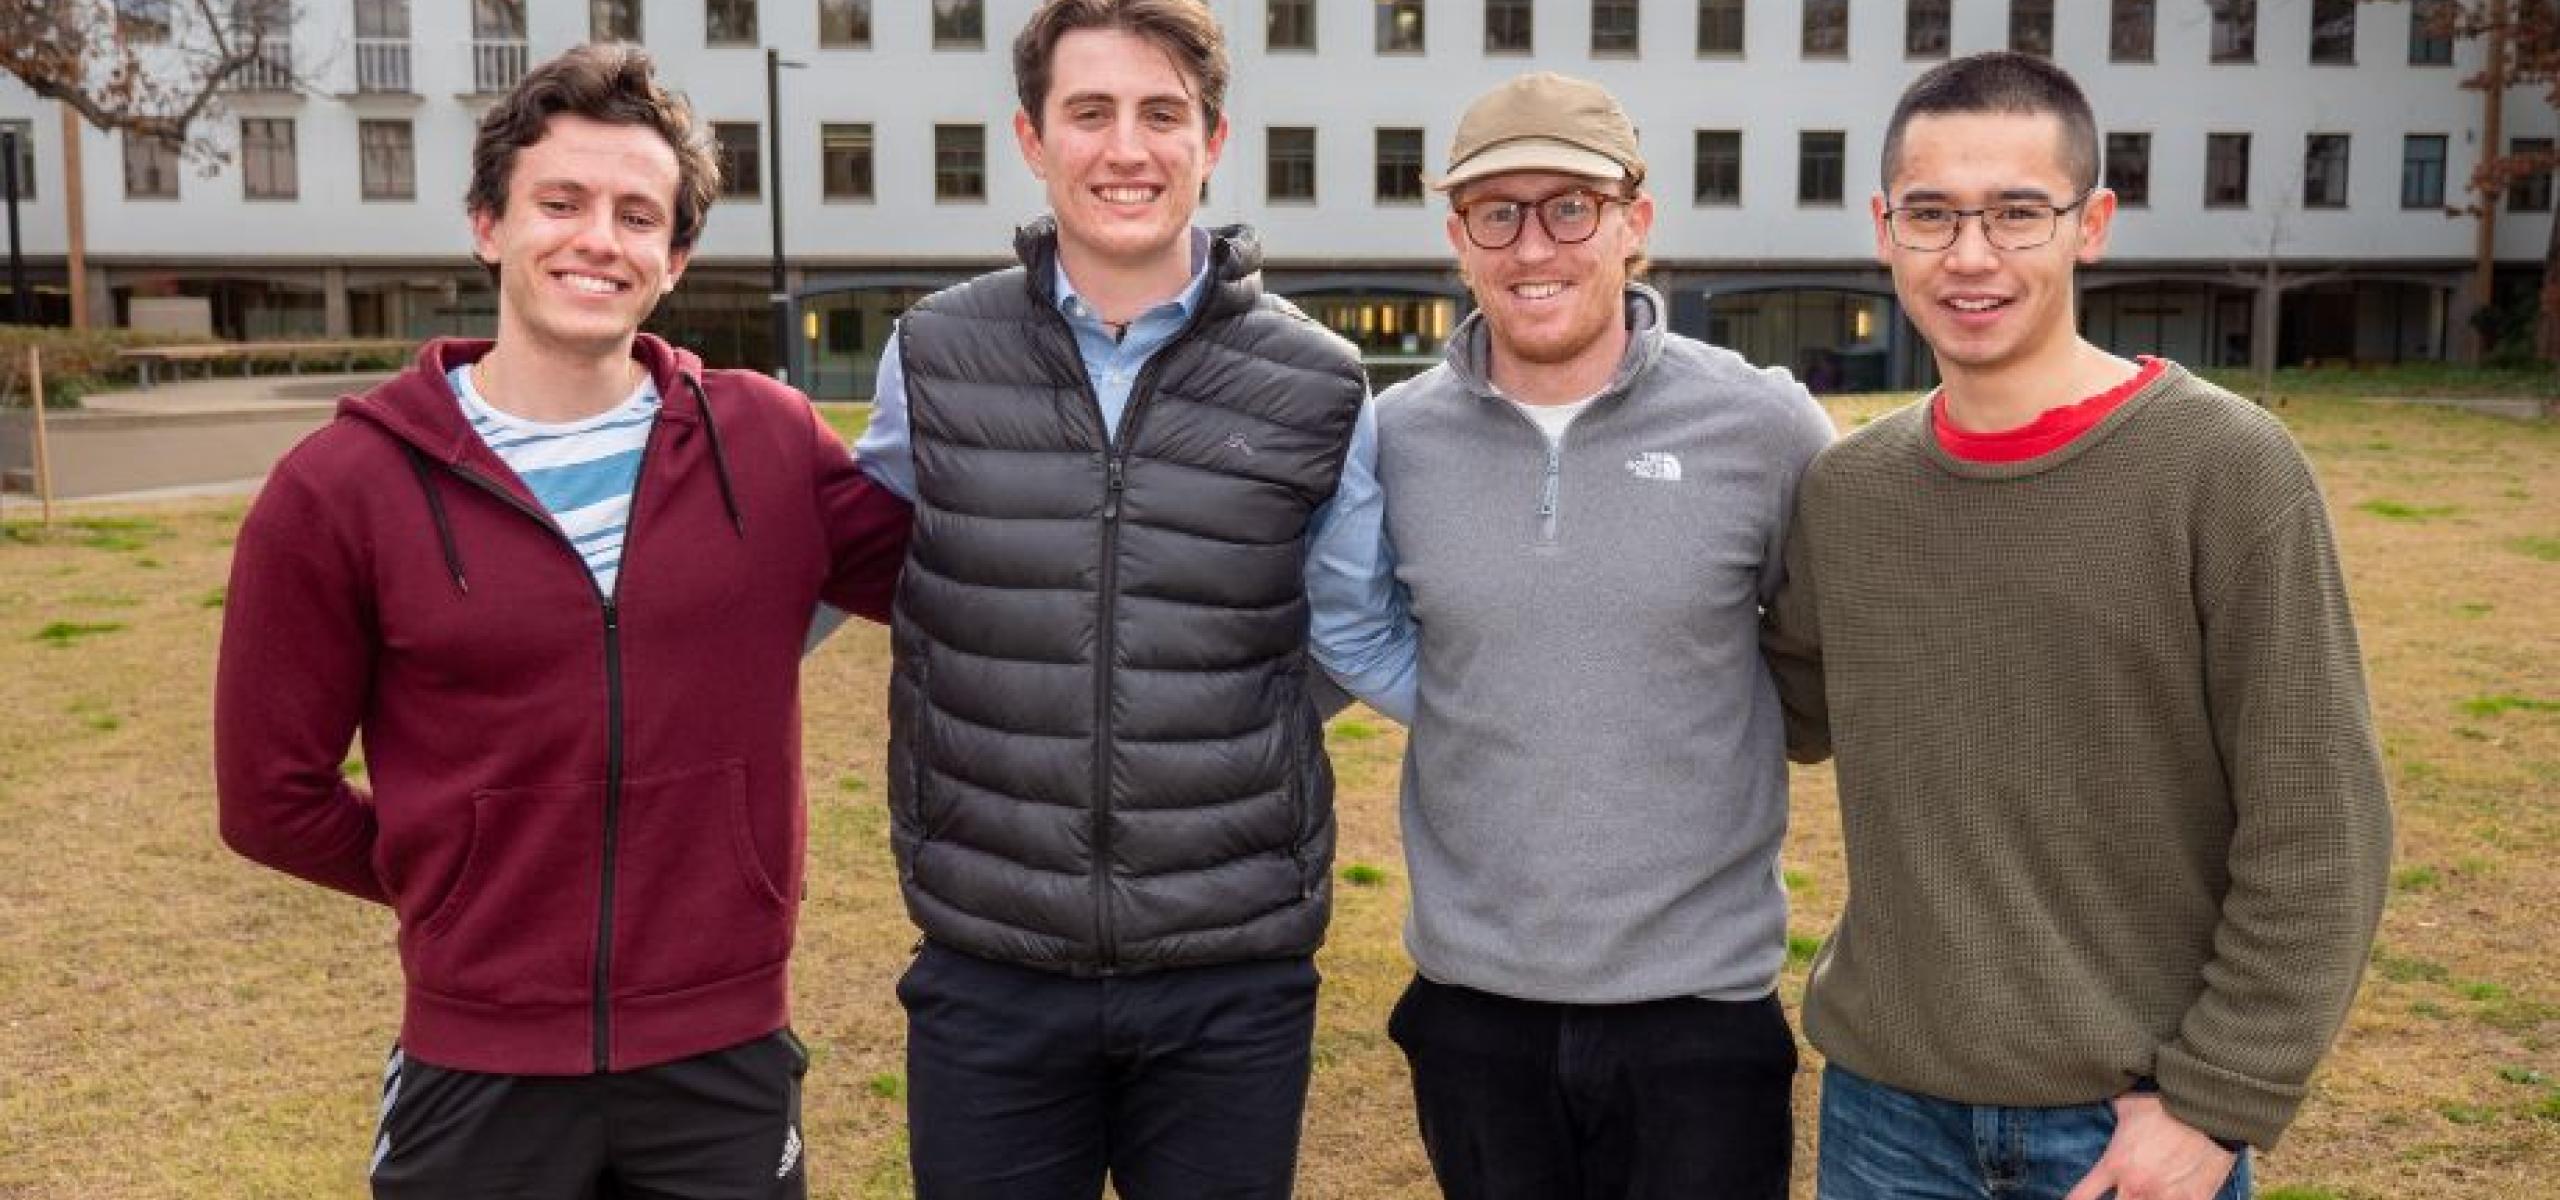 ANU College of Law students (l to r) Dimitrios Bezos, Raf Priest, Zachary Oakes and Charlie Yu.